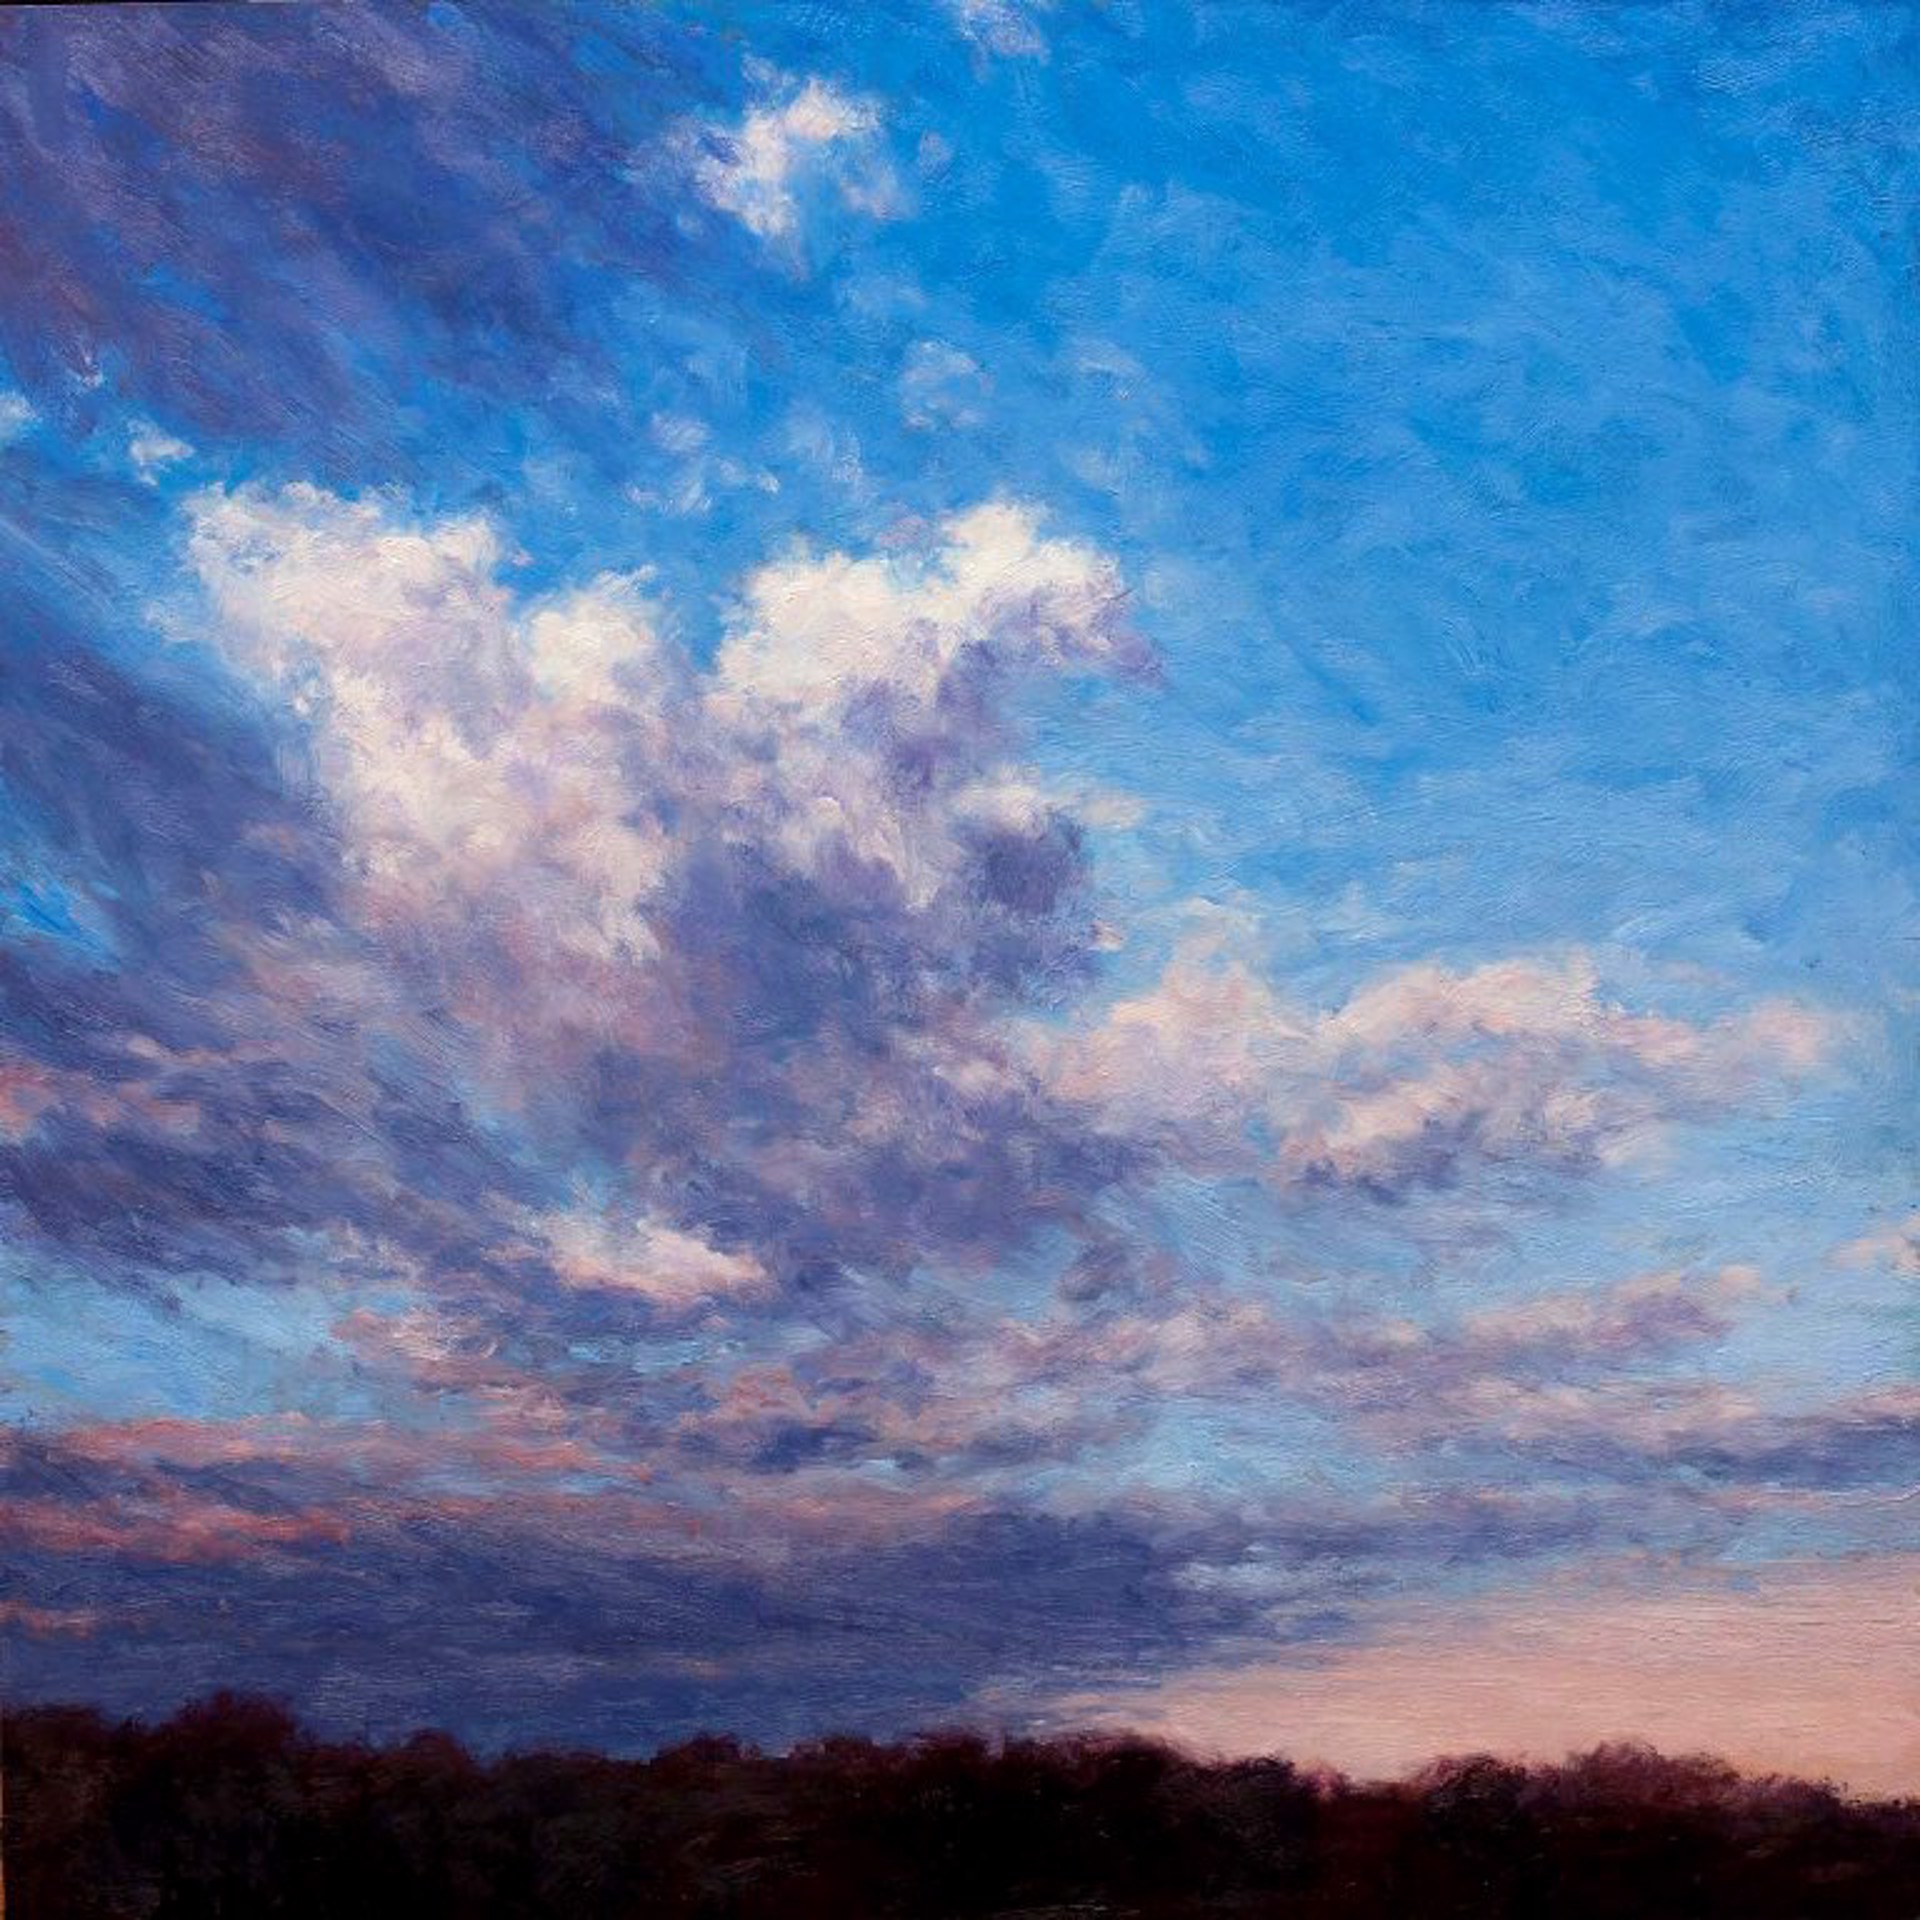 Coming Spring Clouds by Gary Bowling